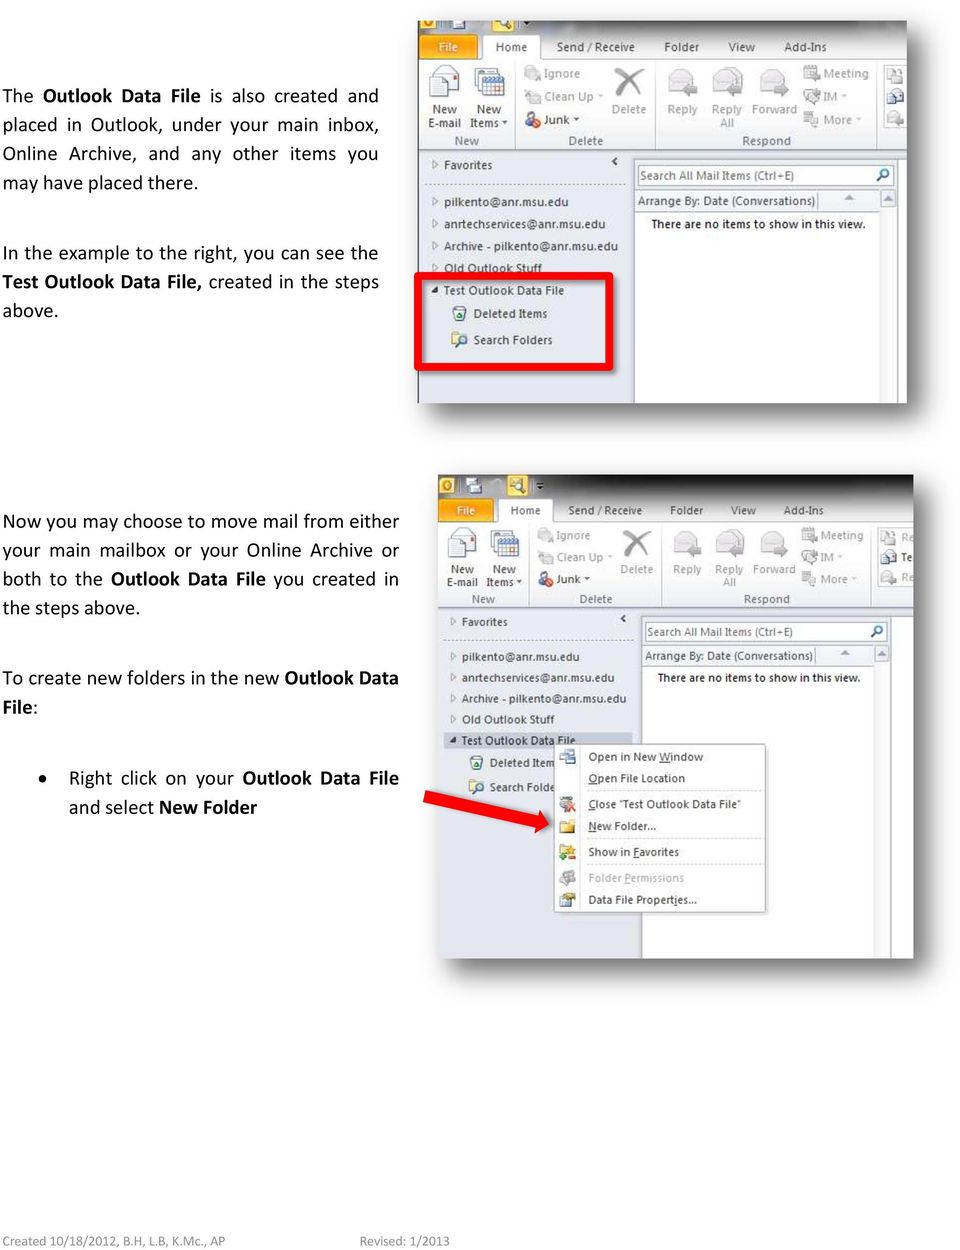 Now you may choose to move mail from either your main mailbox or your Online Archive or both to the Outlook Data File you